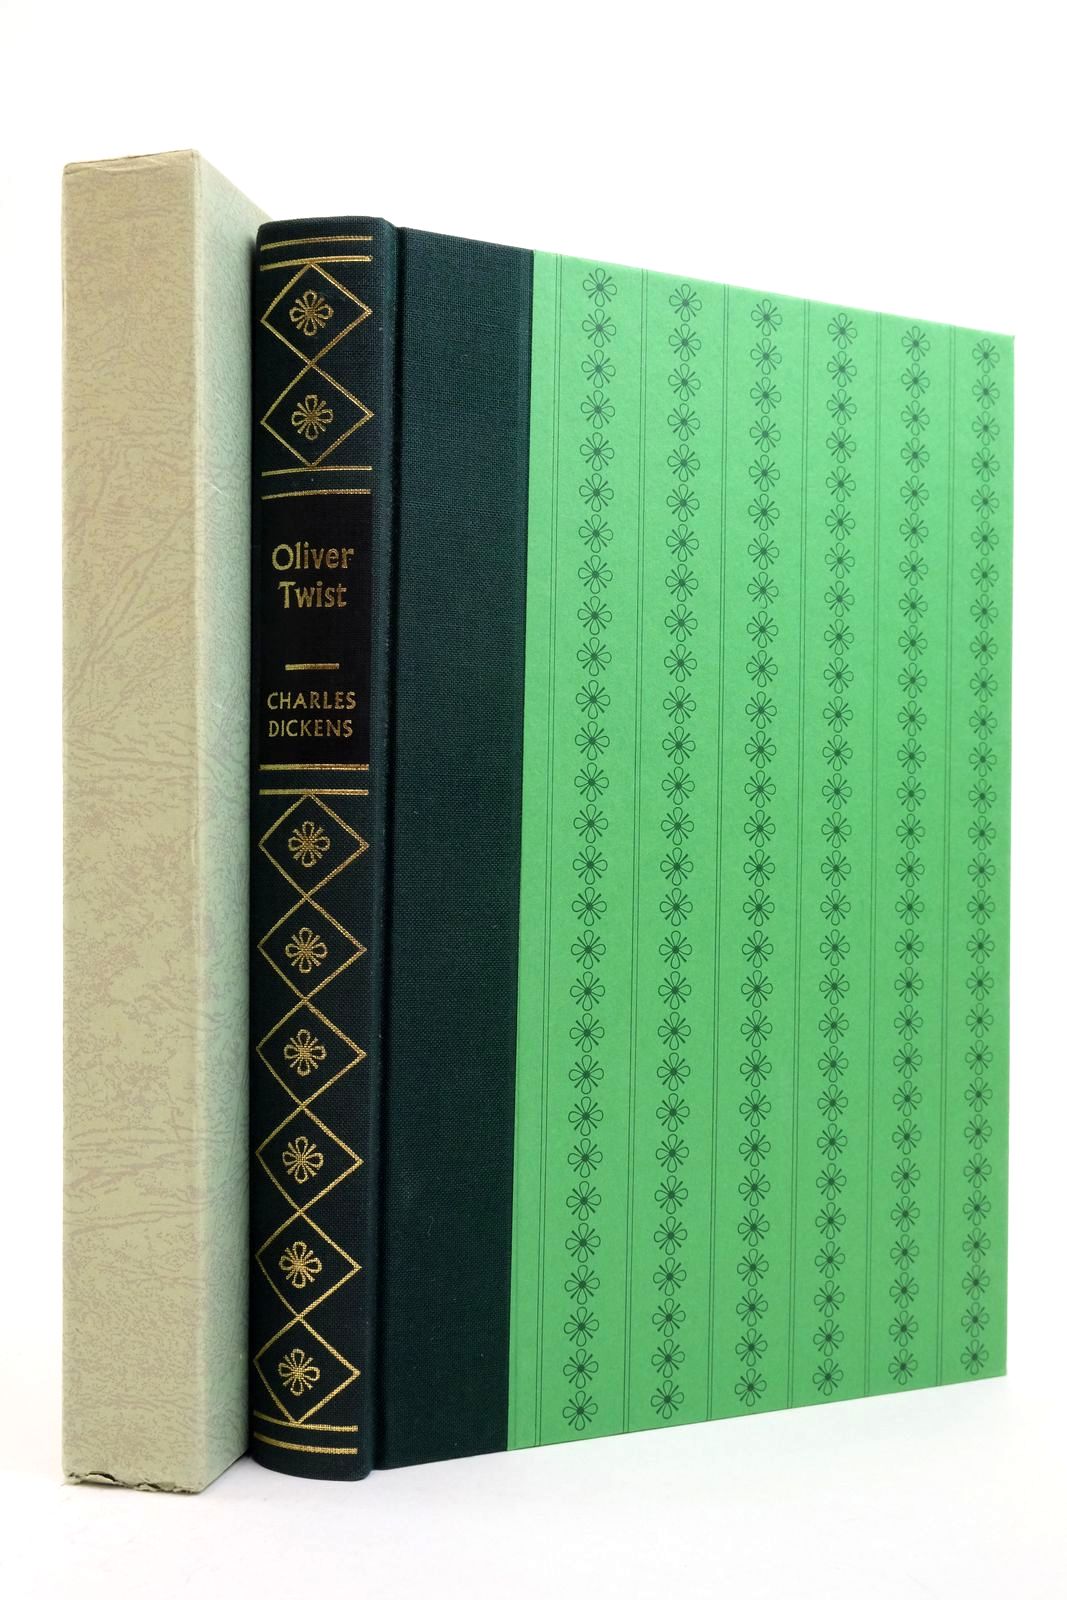 Photo of THE ADVENTURES OF OLIVER TWIST written by Dickens, Charles Hibbert, Christopher illustrated by Keeping, Charles published by Folio Society (STOCK CODE: 2138514)  for sale by Stella & Rose's Books